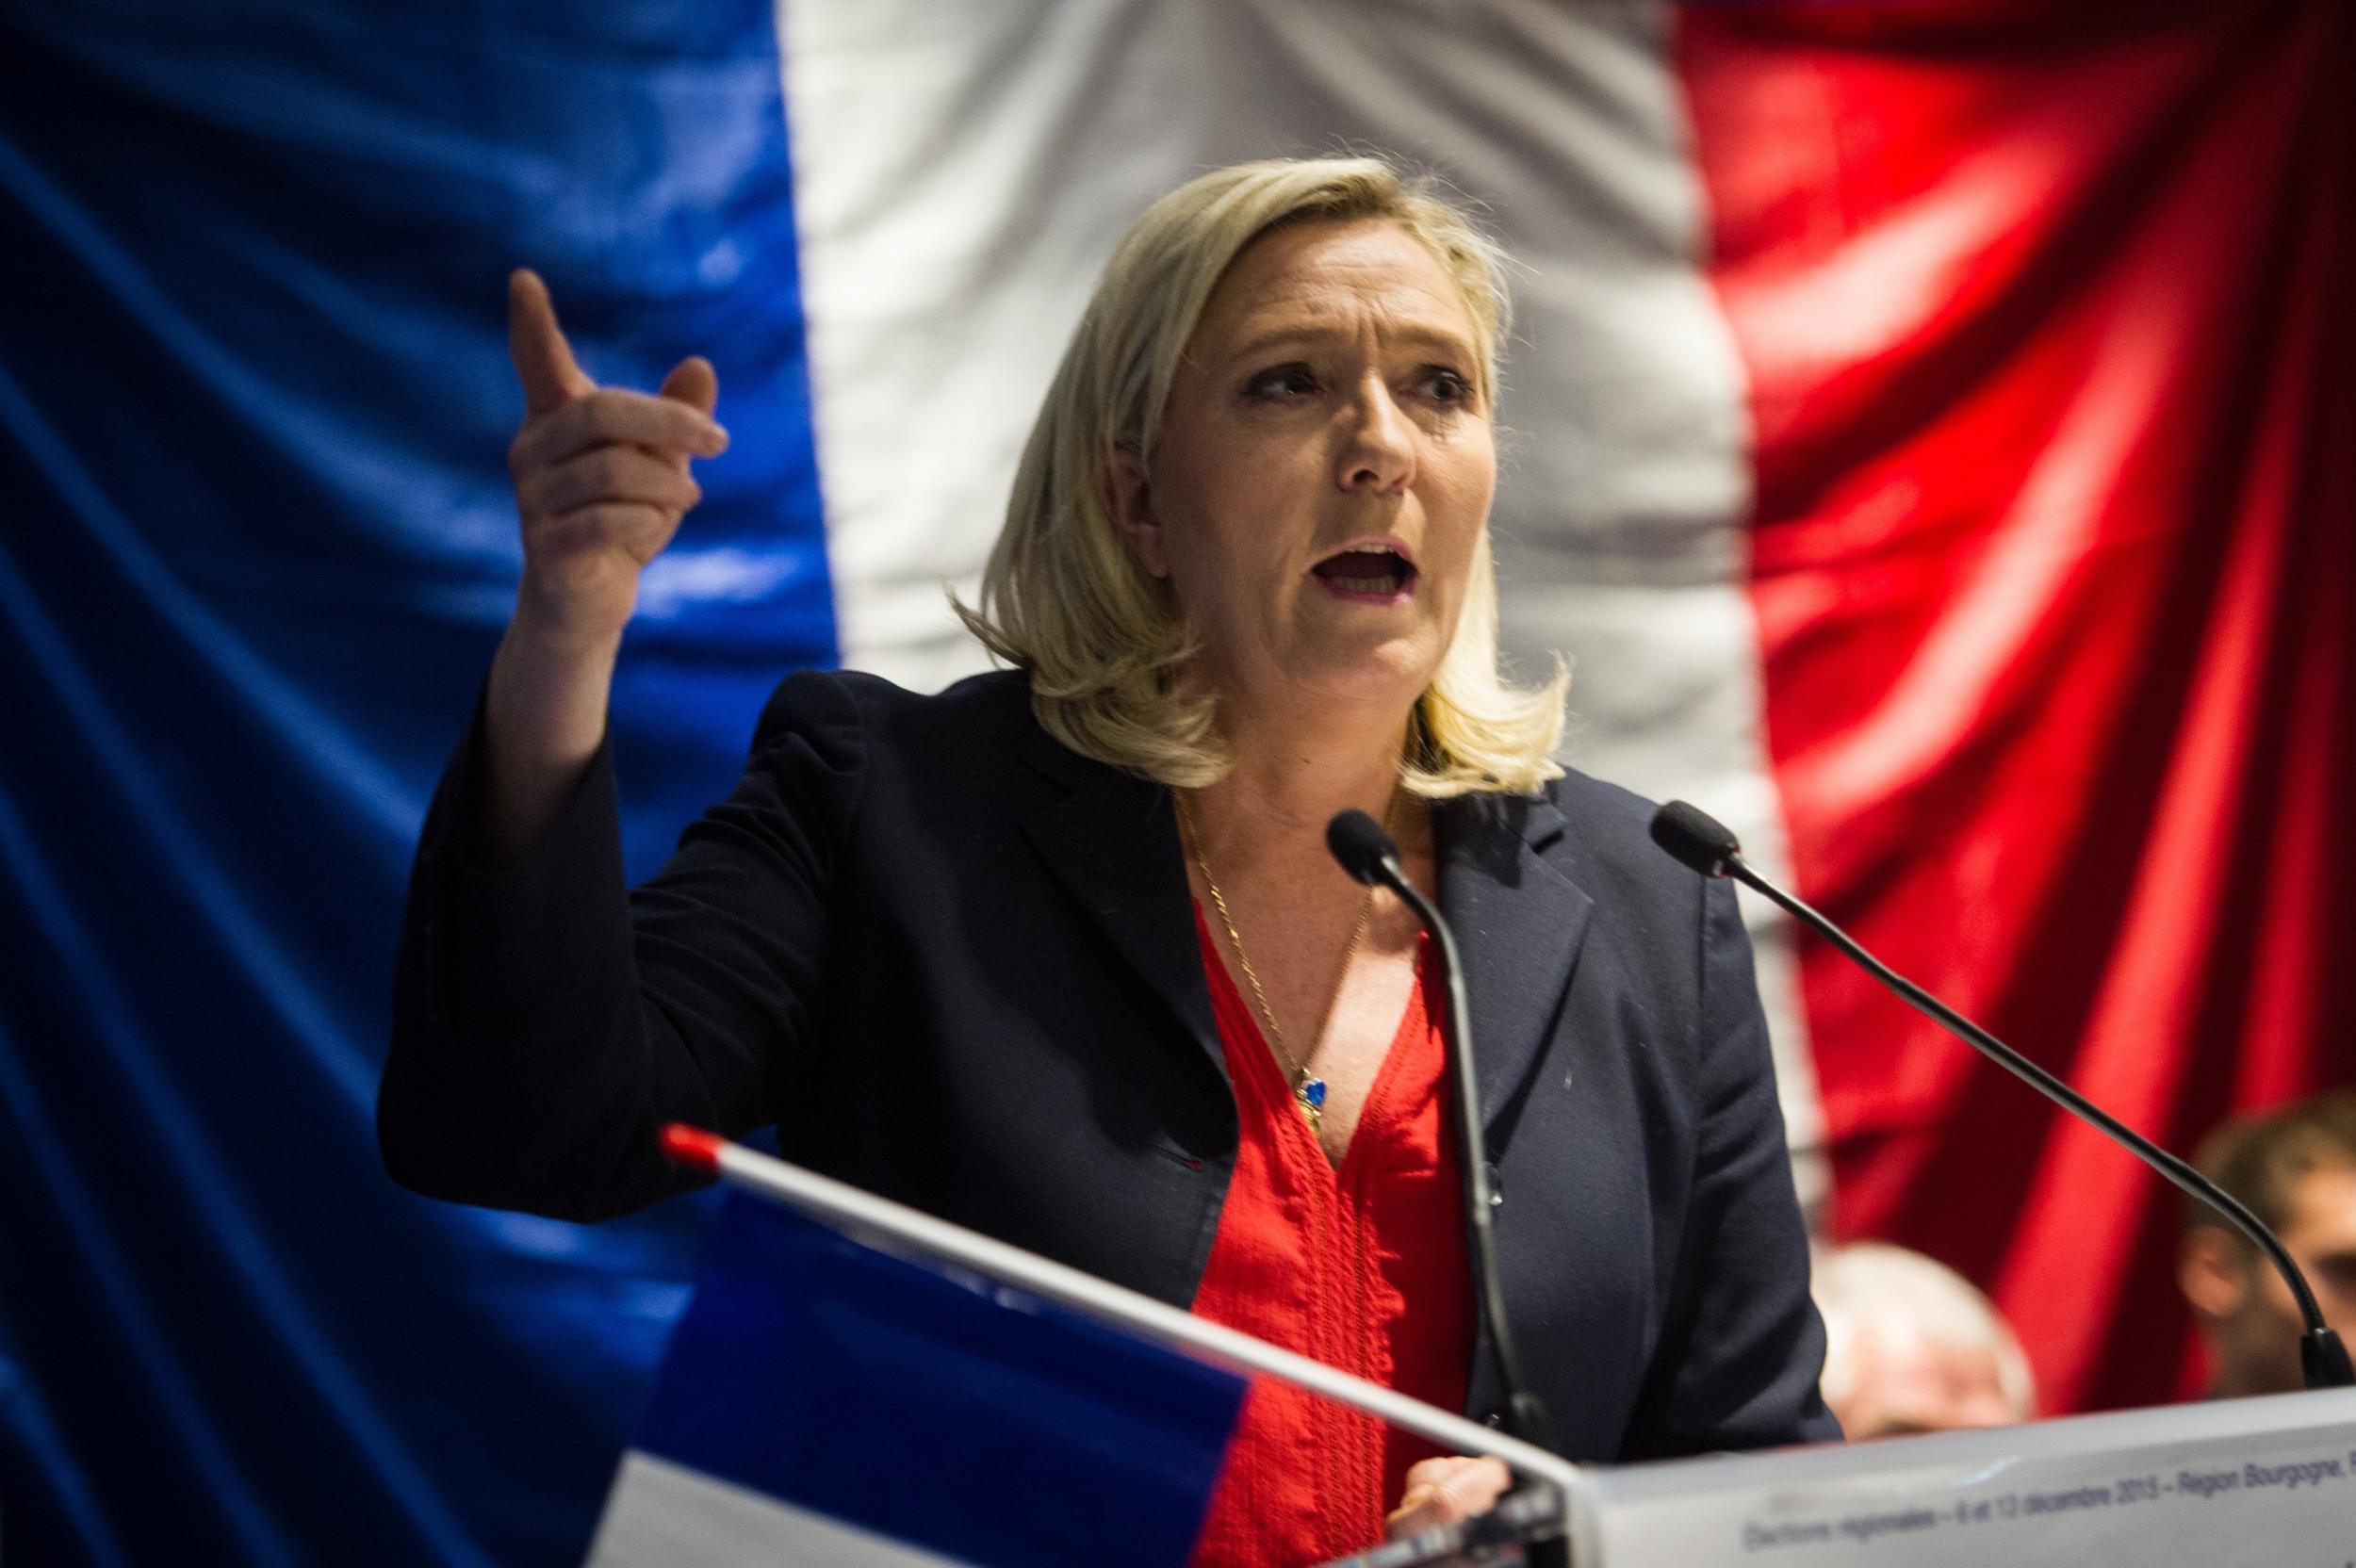 The French National Front leader called Mr Trump’s election the ‘victory of the people against the elites’